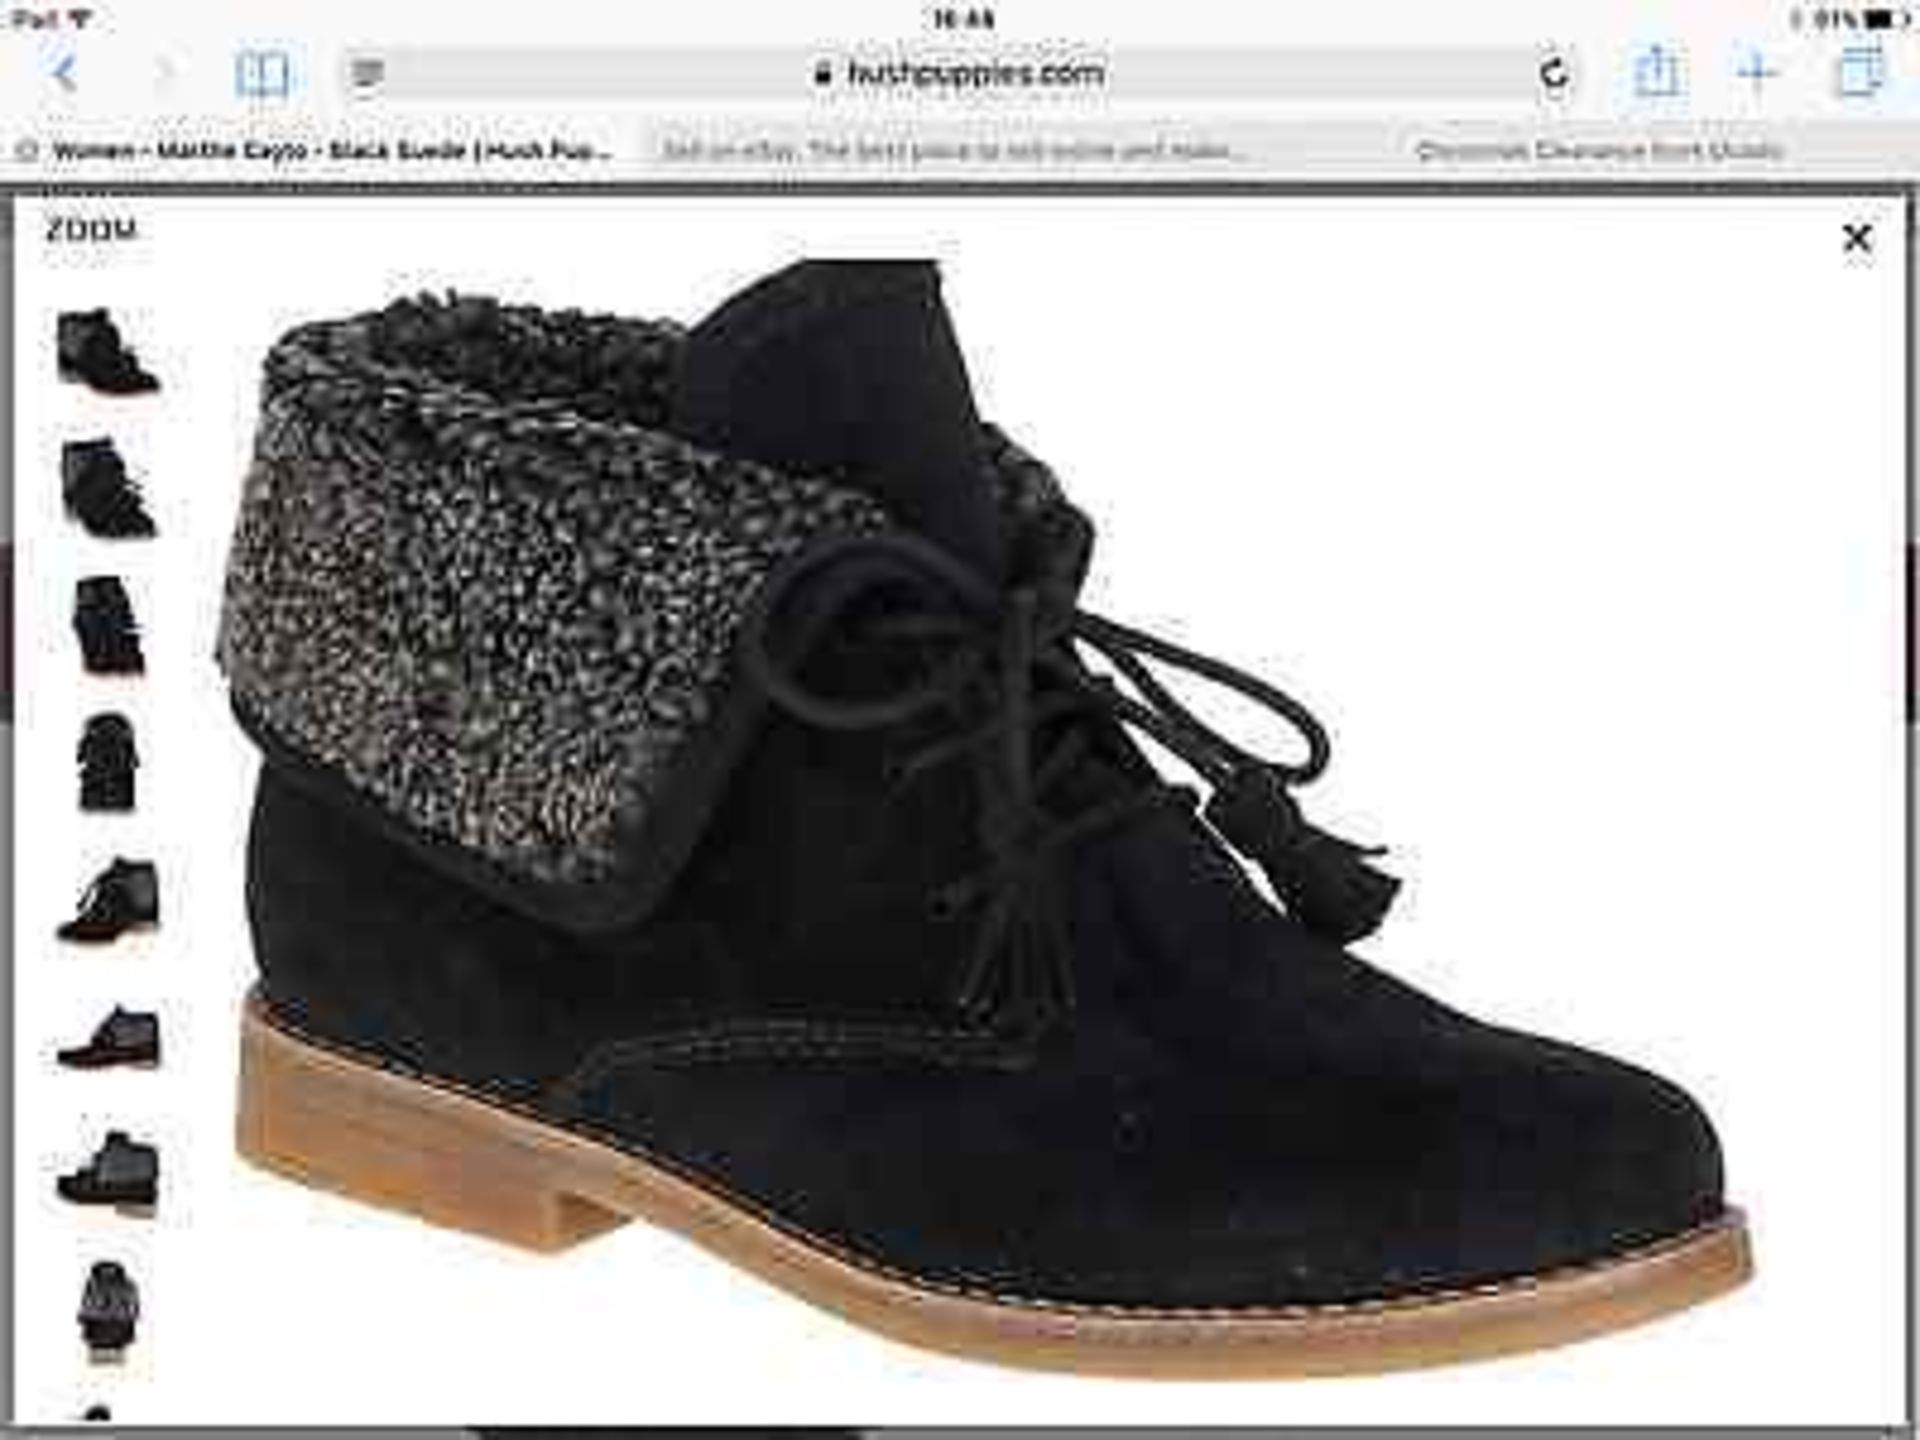 Hush Puppies Black Suede Martha Cayto Ankle Boot, Size UK 7, RRP £100 - Image 4 of 12